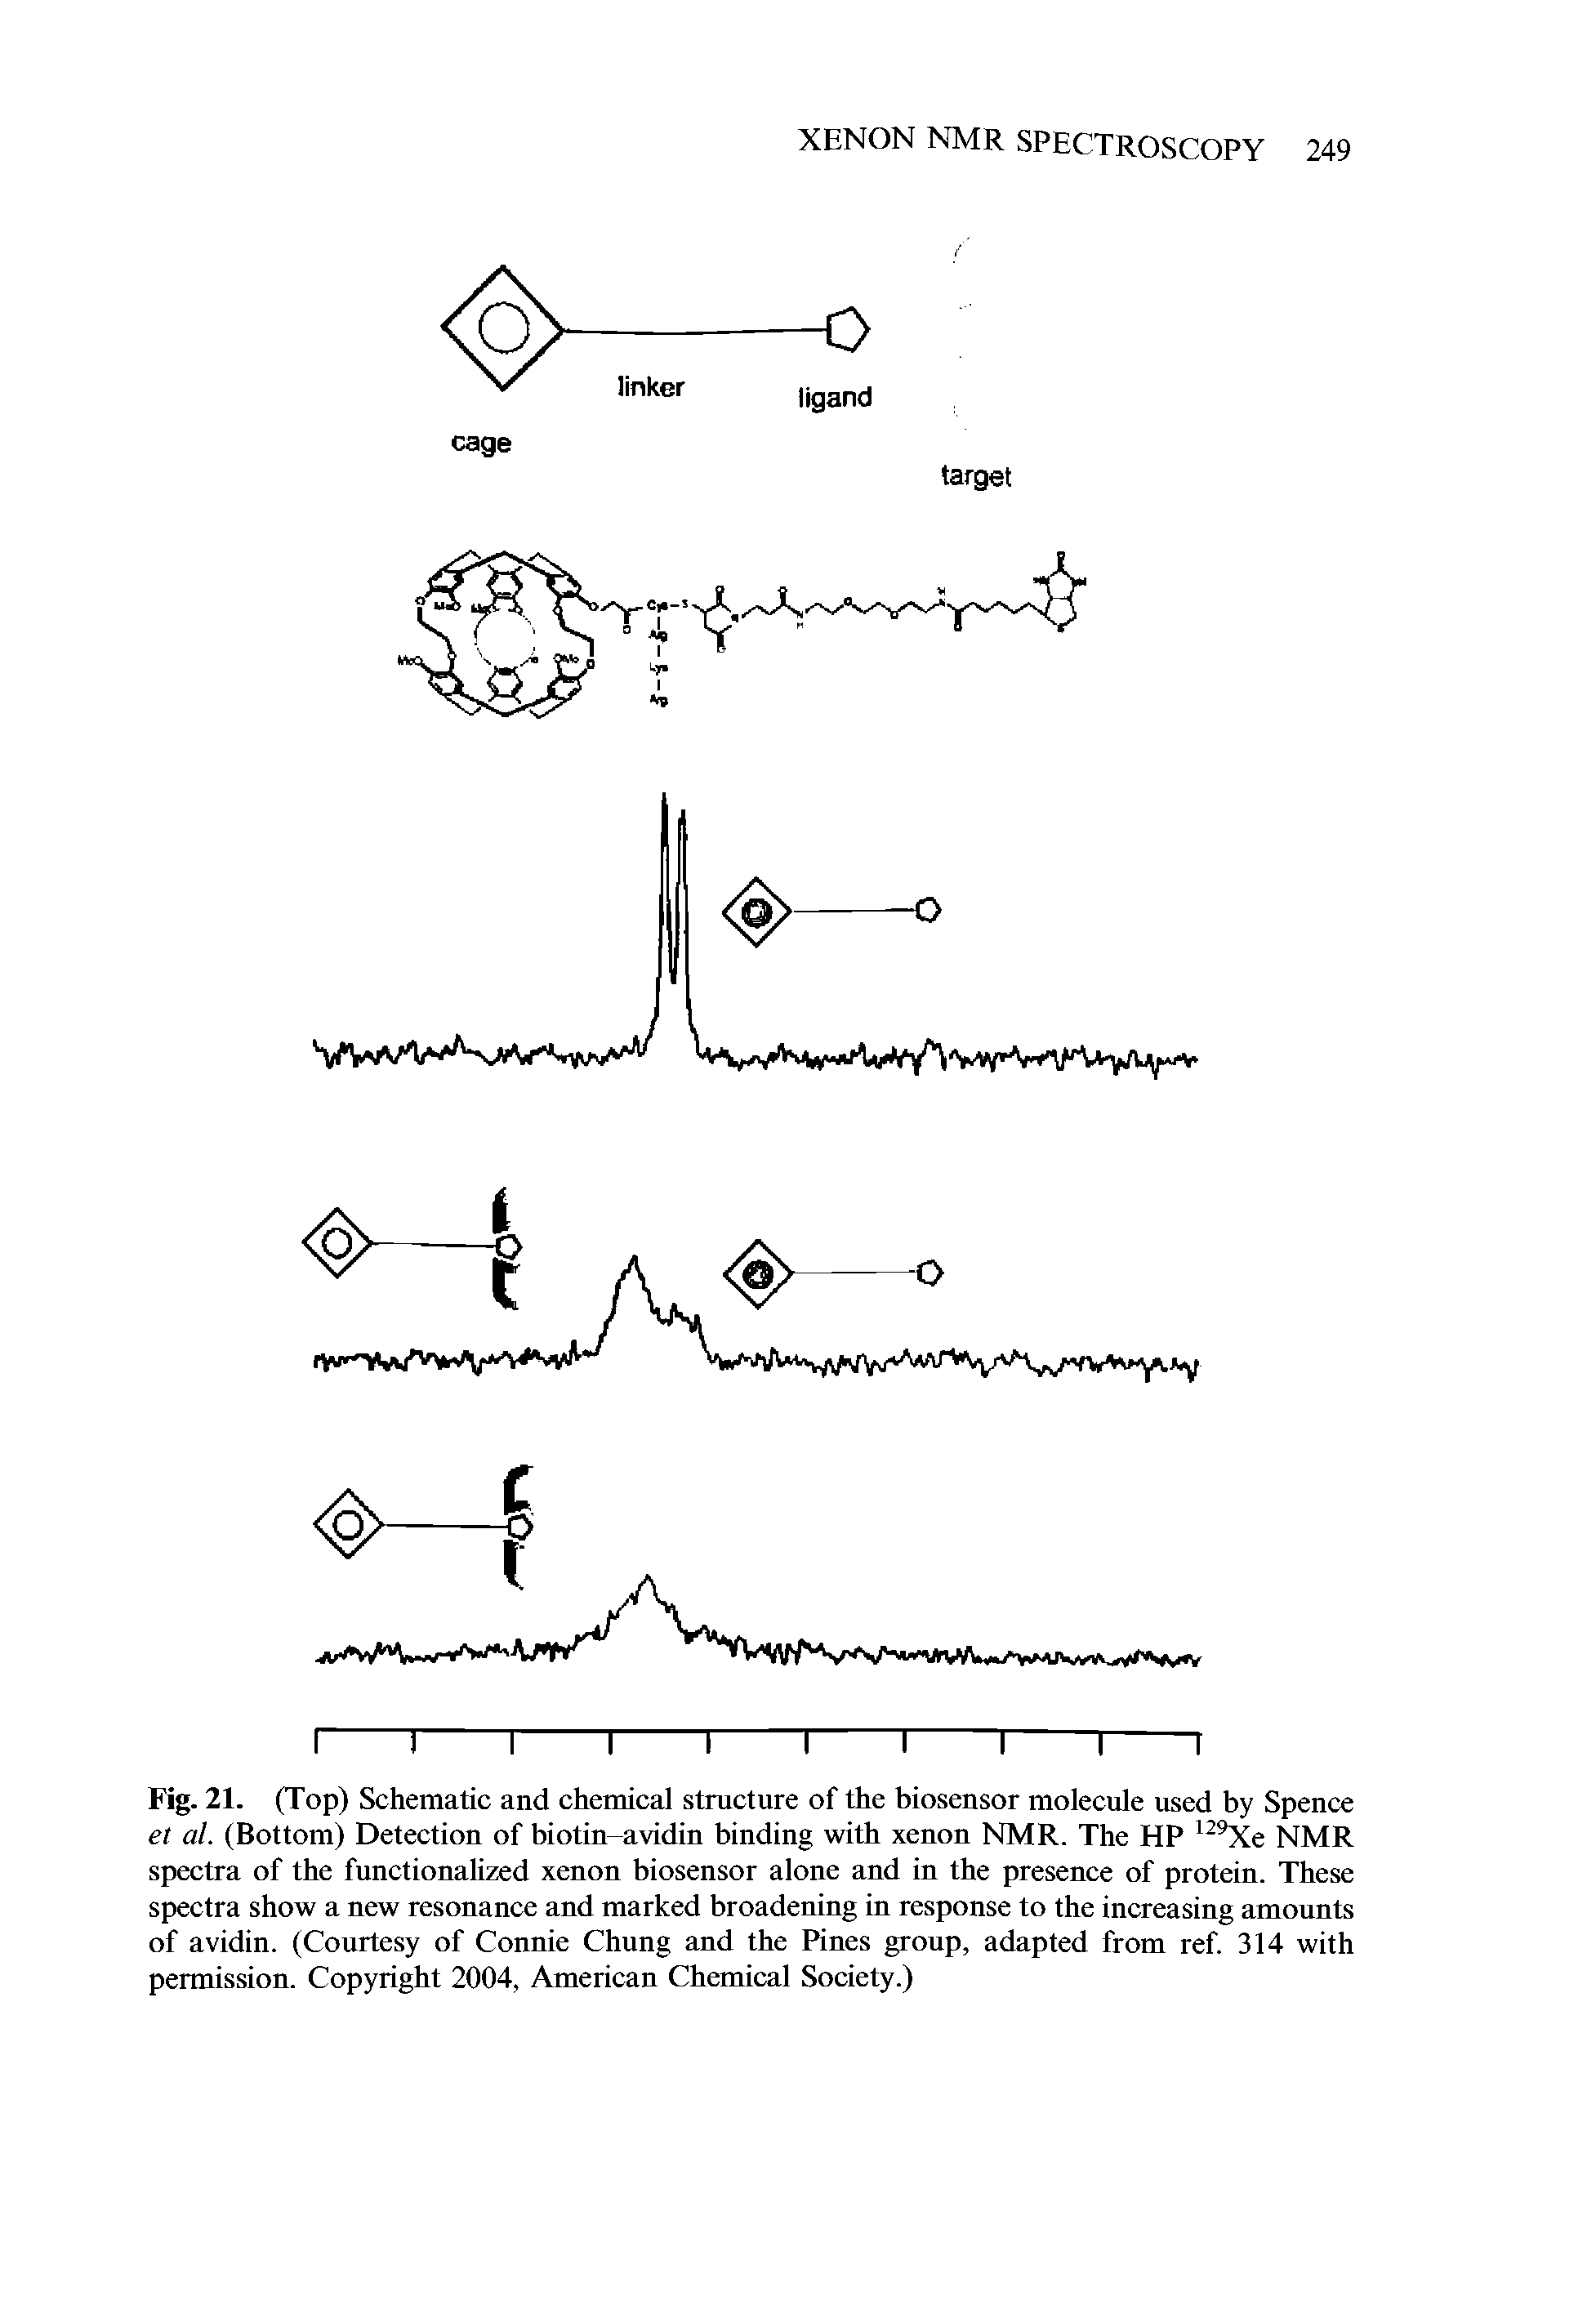 Fig. 21. (Top) Schematic and chemical structure of the biosensor molecule used by Spence et al. (Bottom) Detection of biotin-avidin binding with xenon NMR. The HP Xe NMR spectra of the functionalized xenon biosensor alone and in the presence of protein. These spectra show a new resonance and marked broadening in response to the increasing amounts of avidin. (Courtesy of Connie Chung and the Pines group, adapted from ref. 314 with permission. Copyright 2004, American Chemical Society.)...